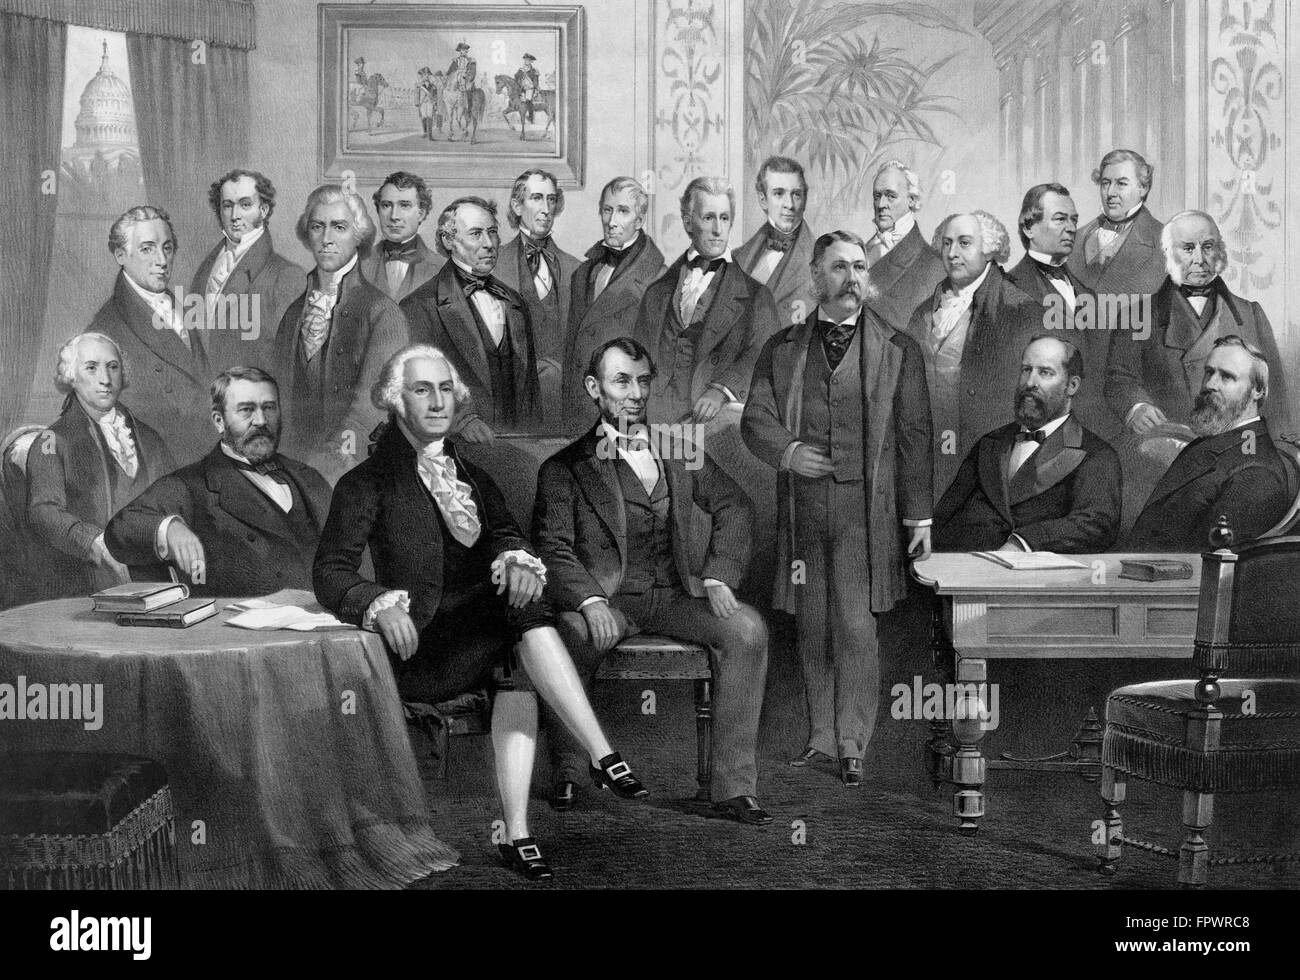 Vintage American history print of the first twenty-one Presidents of The United States, seated together in The White House. Incl Stock Photo